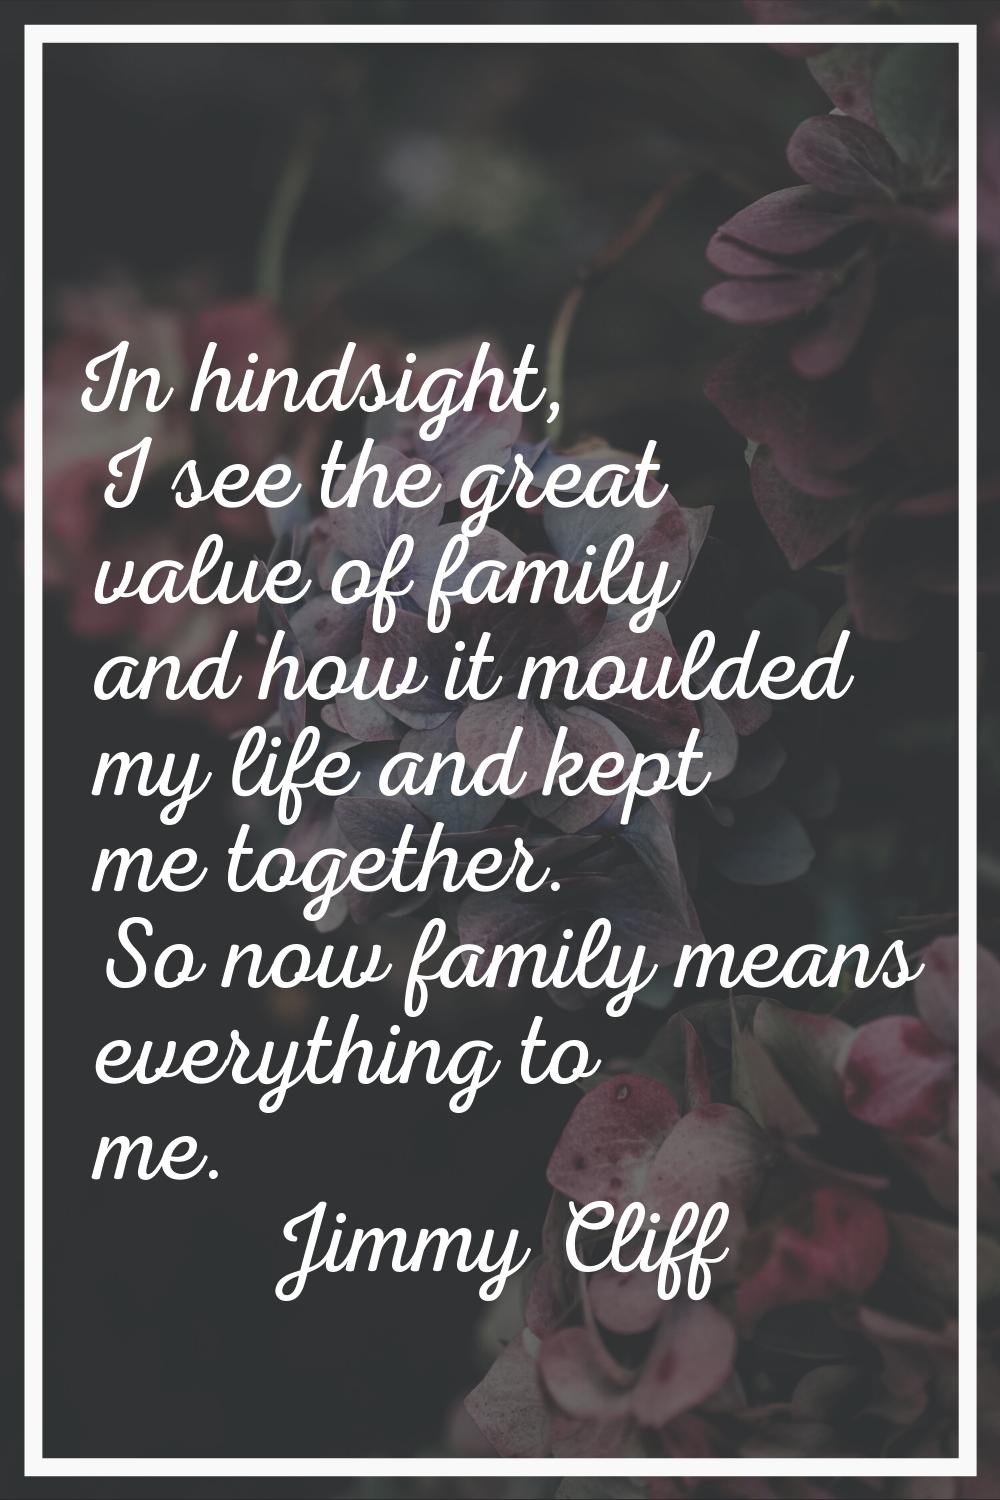 In hindsight, I see the great value of family and how it moulded my life and kept me together. So n